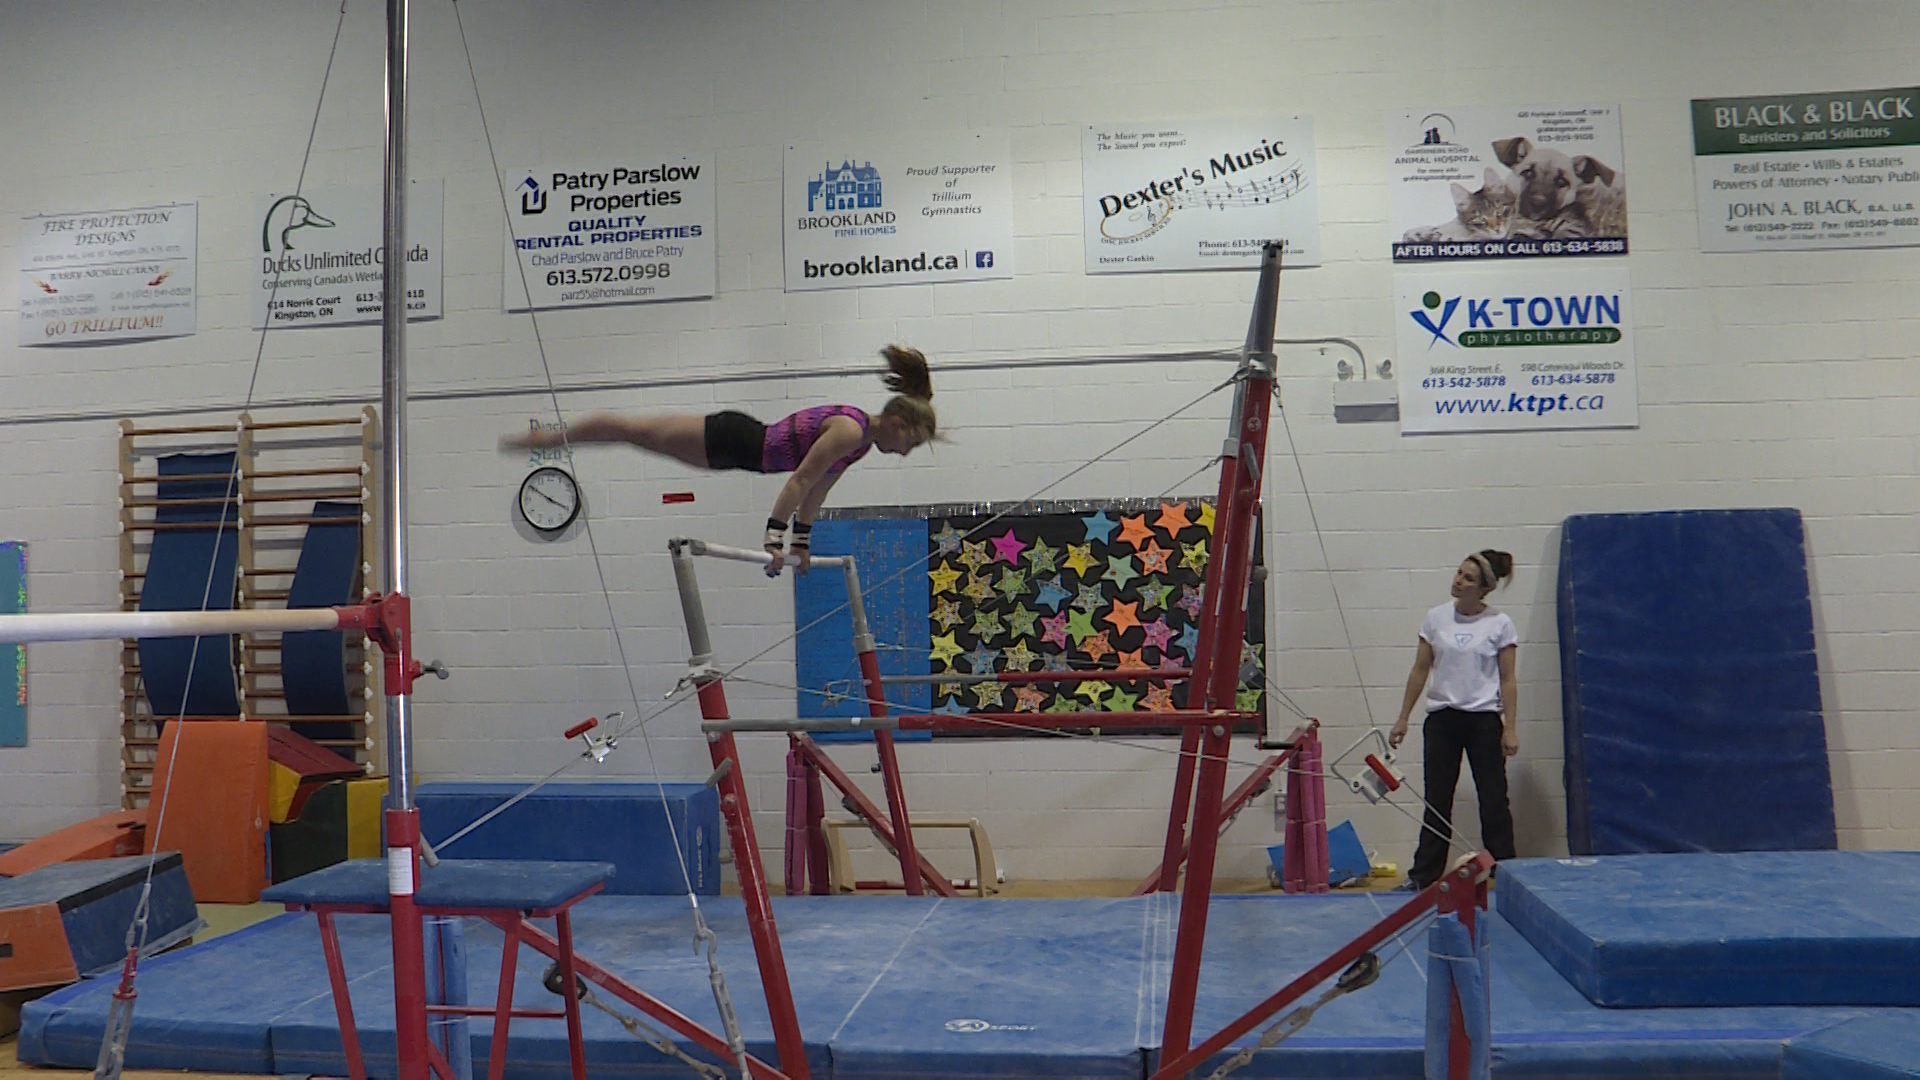 Clydebank gymnasts bounce back from pandemic with rousing win